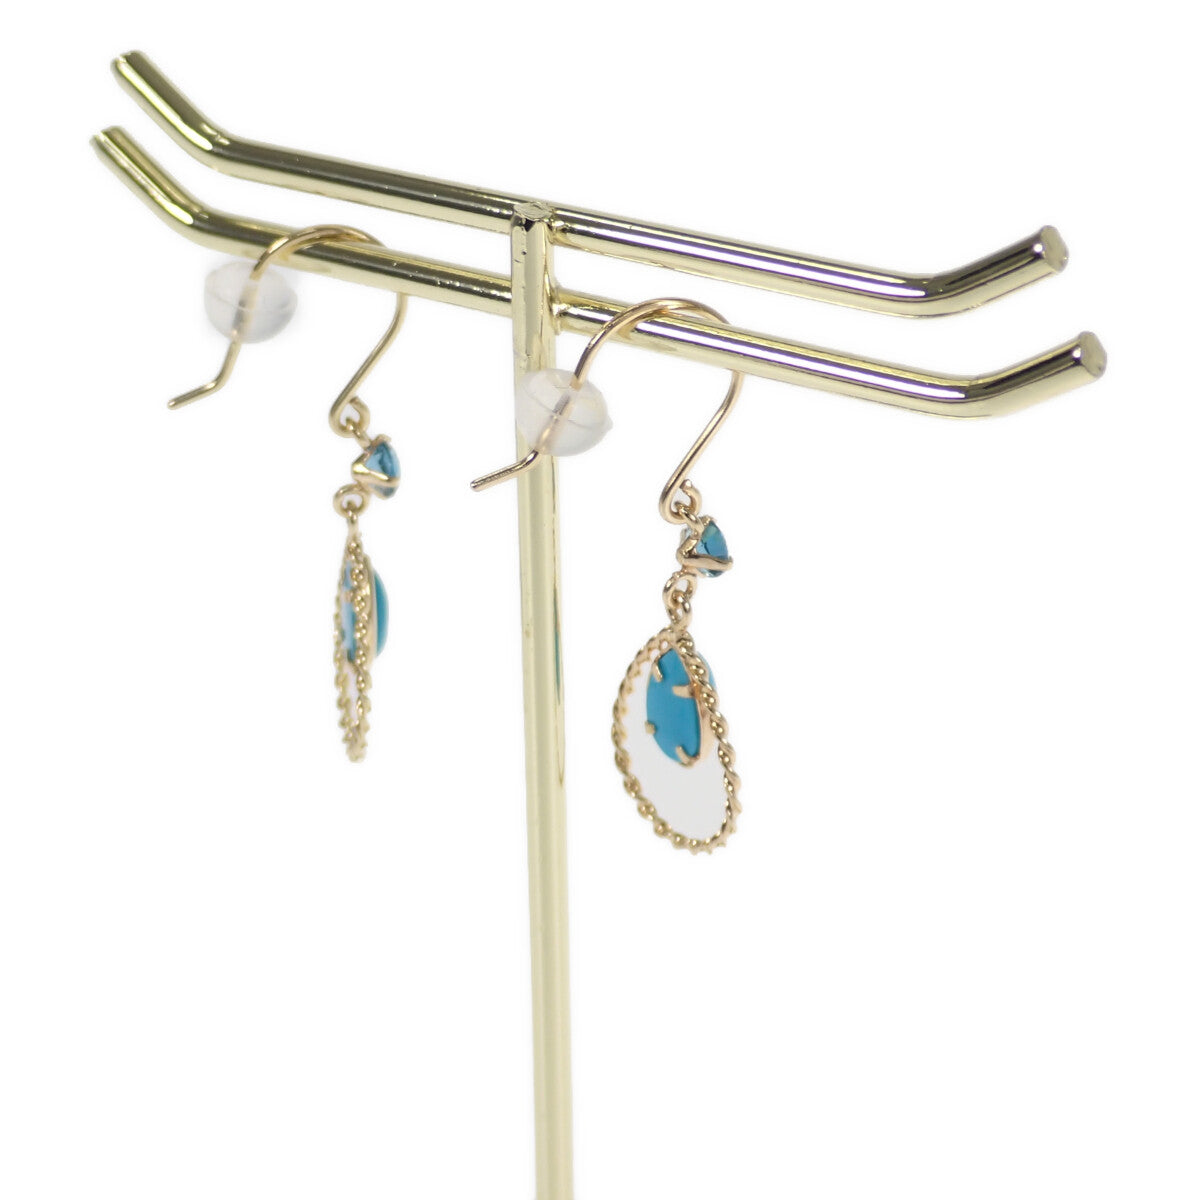 Women's 0.14ct Turquoise Drop Design Earrings in K18 Yellow Gold, Gold, Never Used, Pre-owned